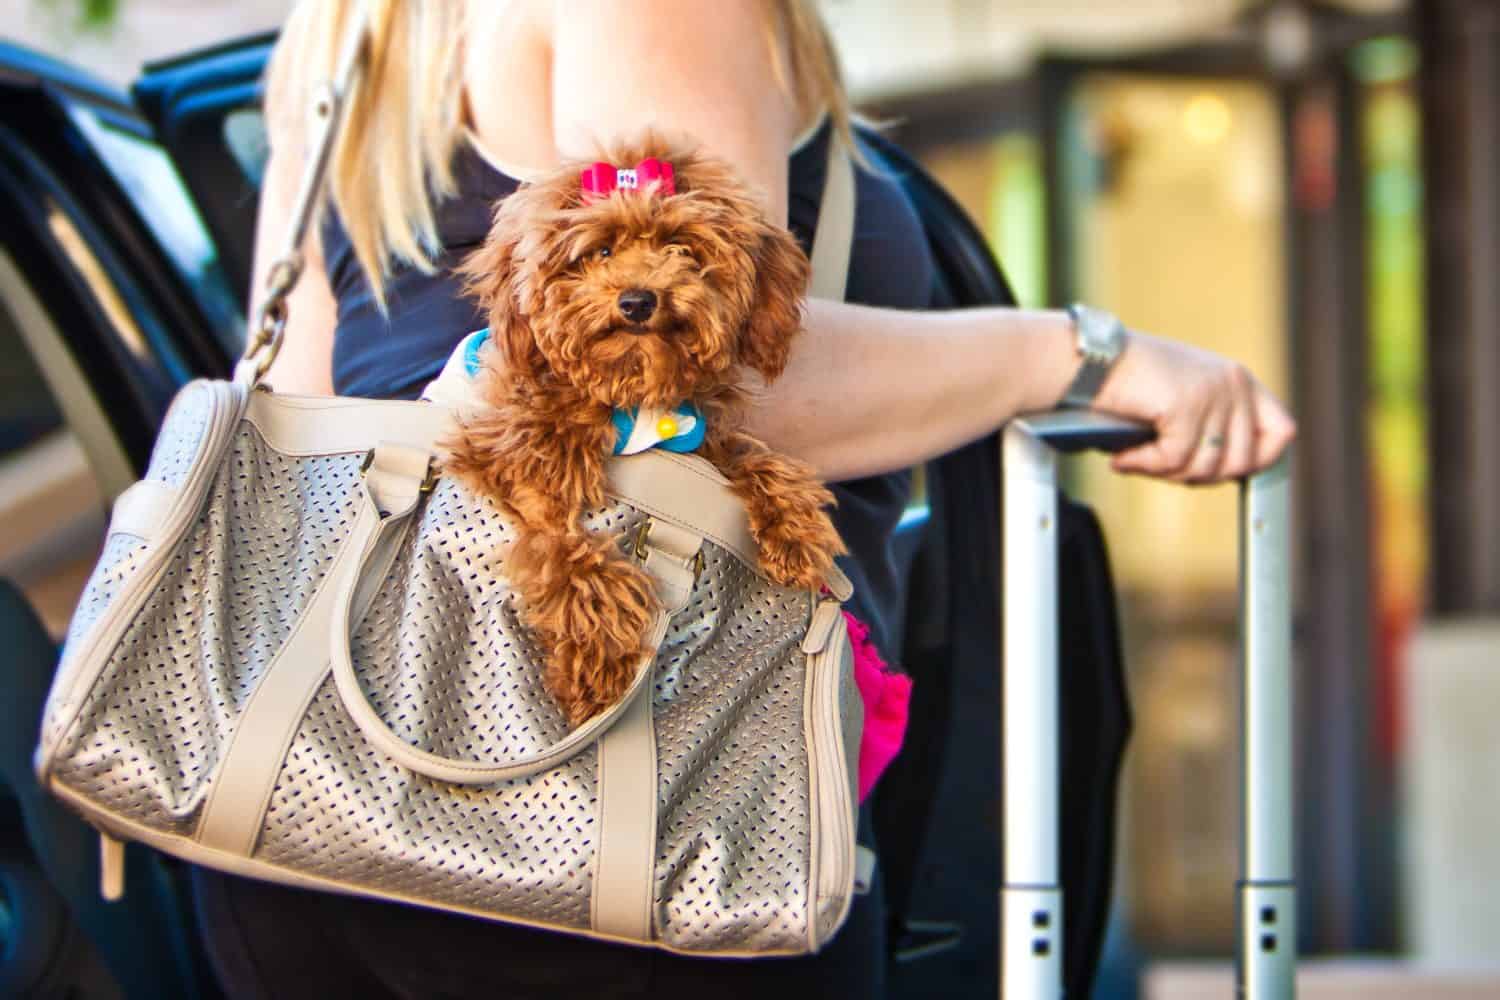 A miniature Poodle dog in a travel carrier bag being held by a woman getting out of a car with a suitcase